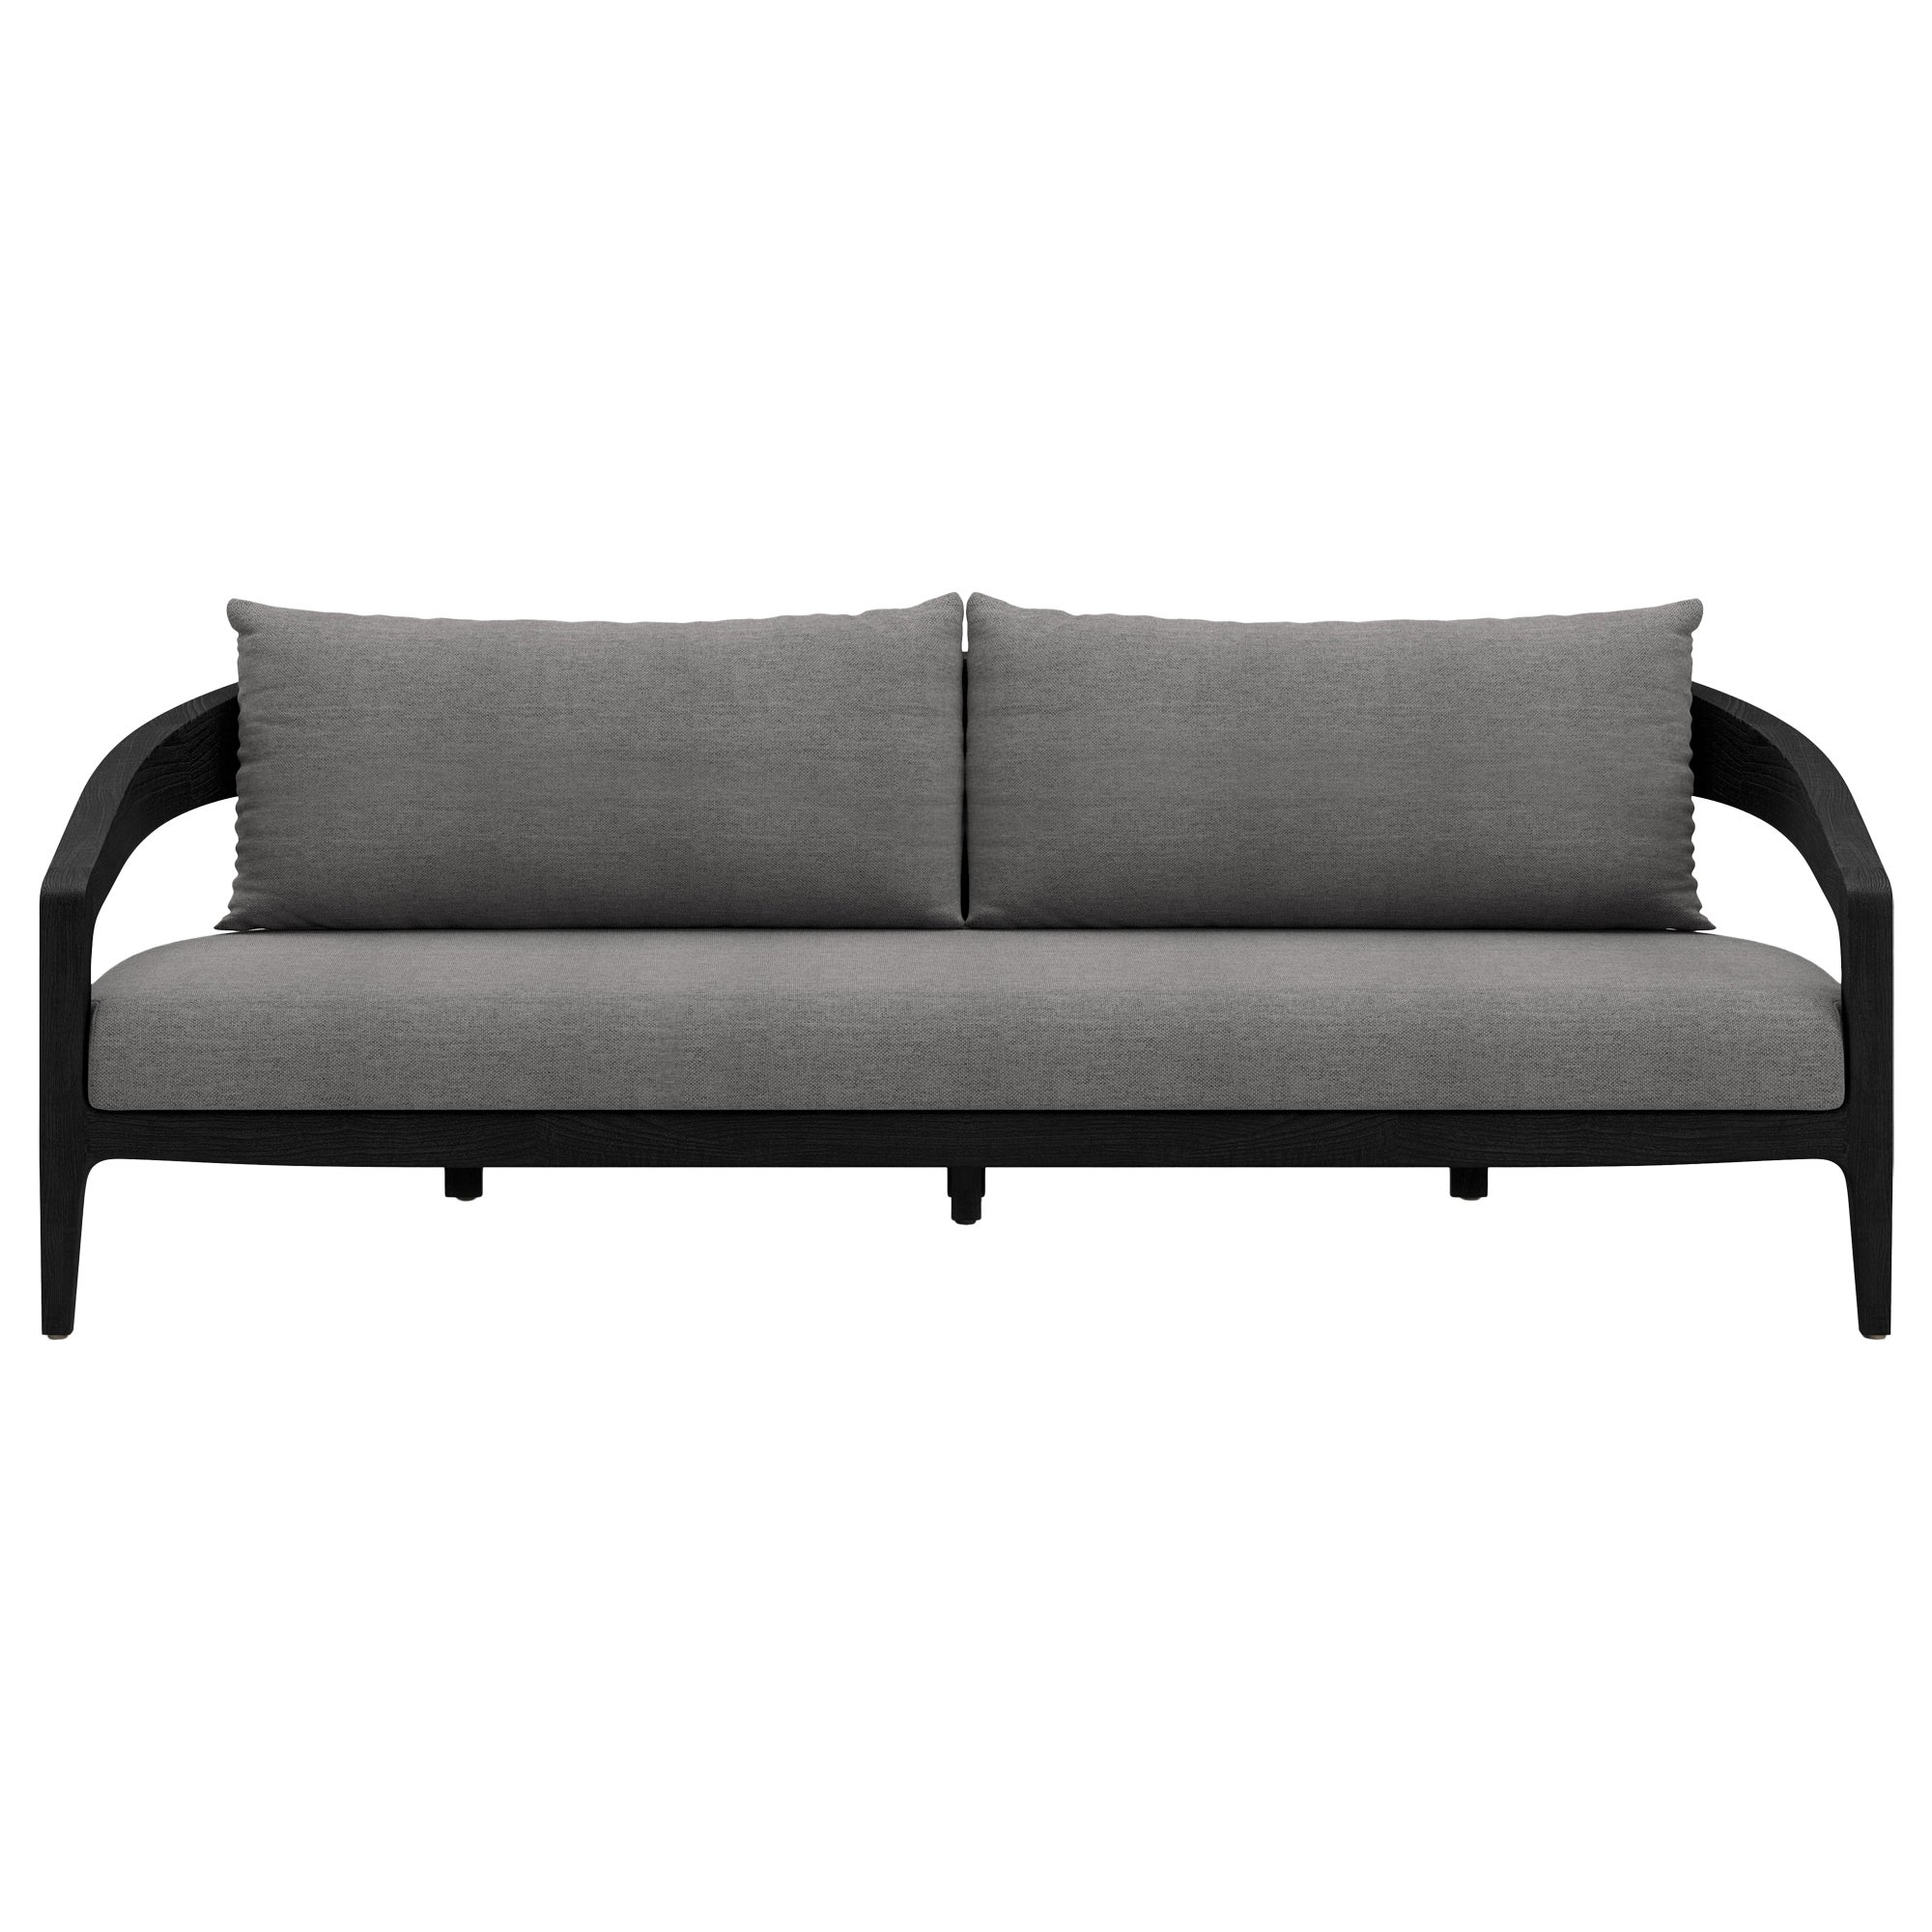 Whale-noche Outdoor 3 Seater Sofa by SNOC For Sale